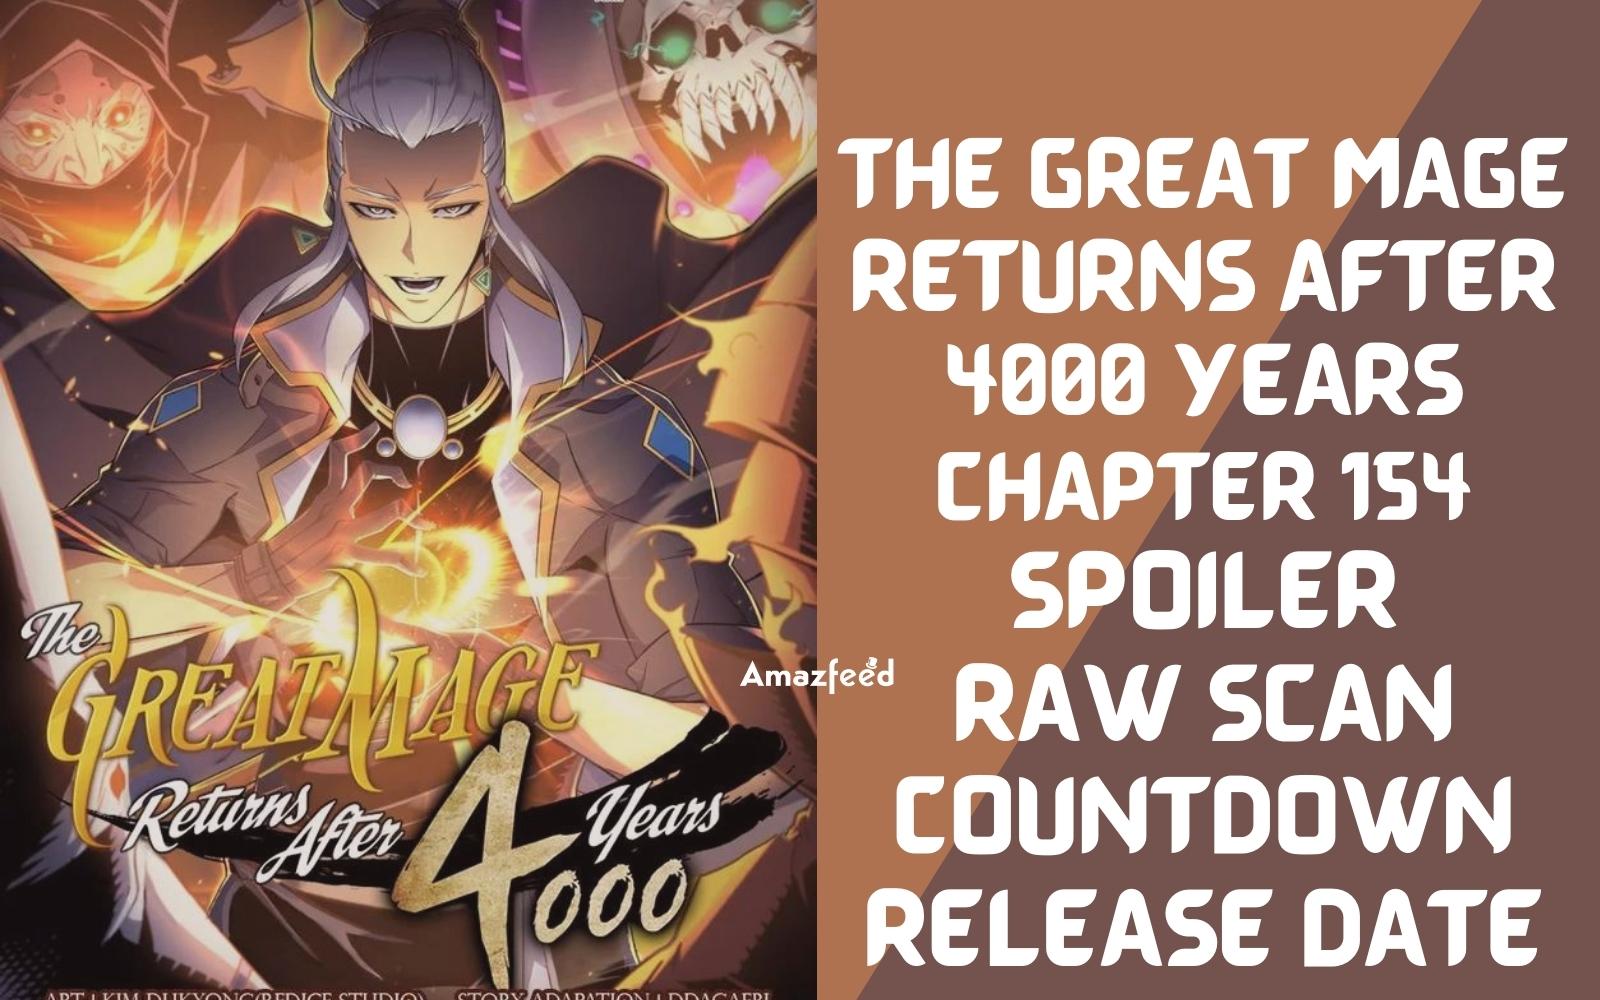 The Great Mage Returns After 4000 Years Chapter 154 Spoiler, Raw Scan, Release Date, Color Page